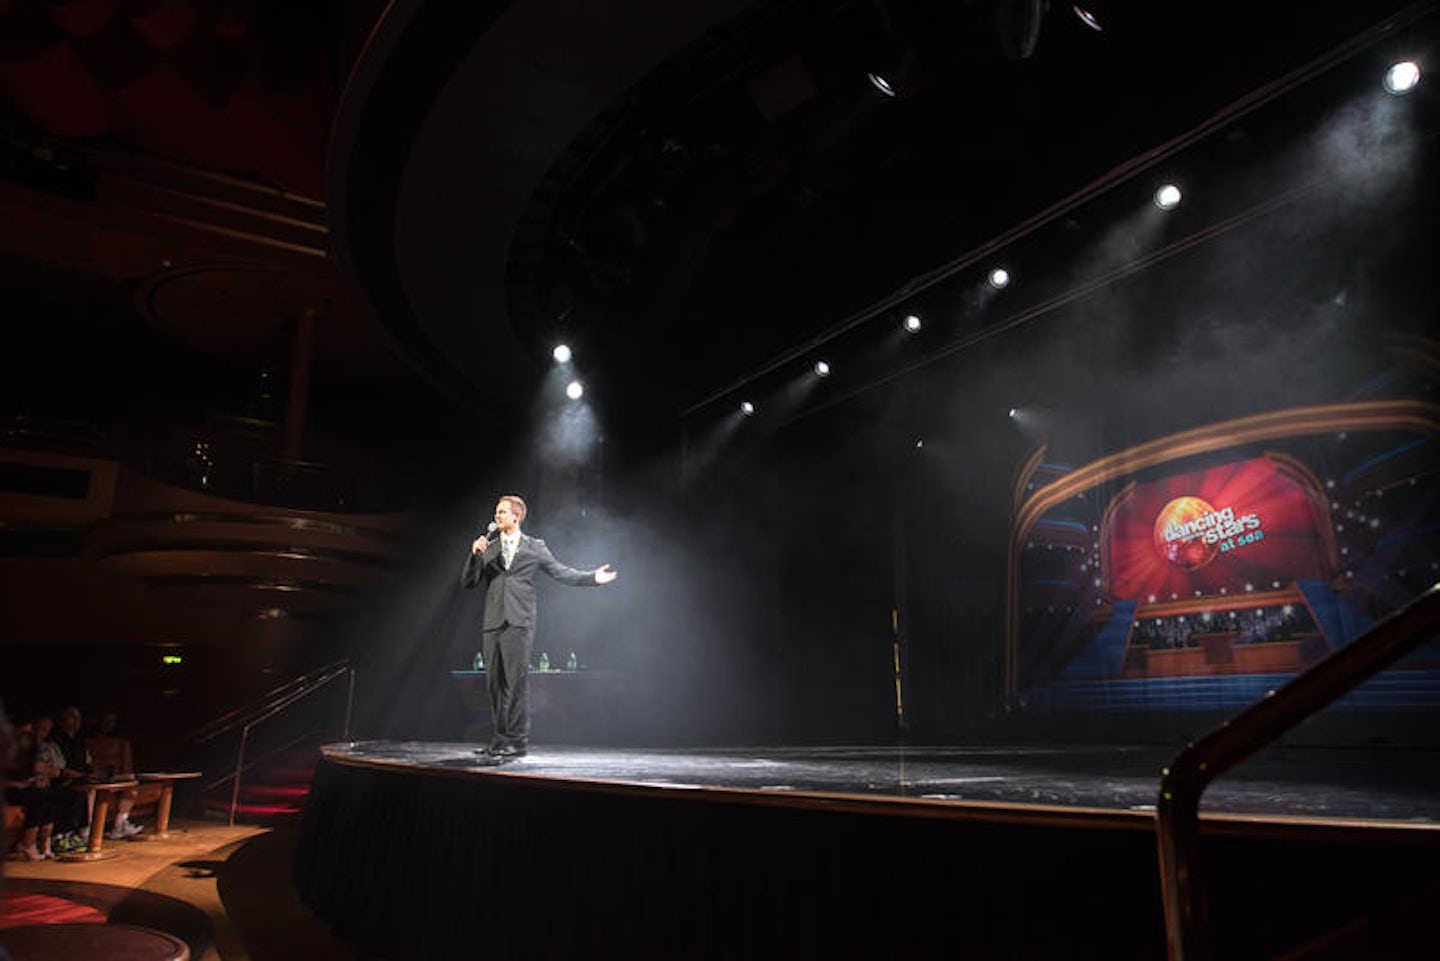 Dancing With the Stars at Sea on Noordam